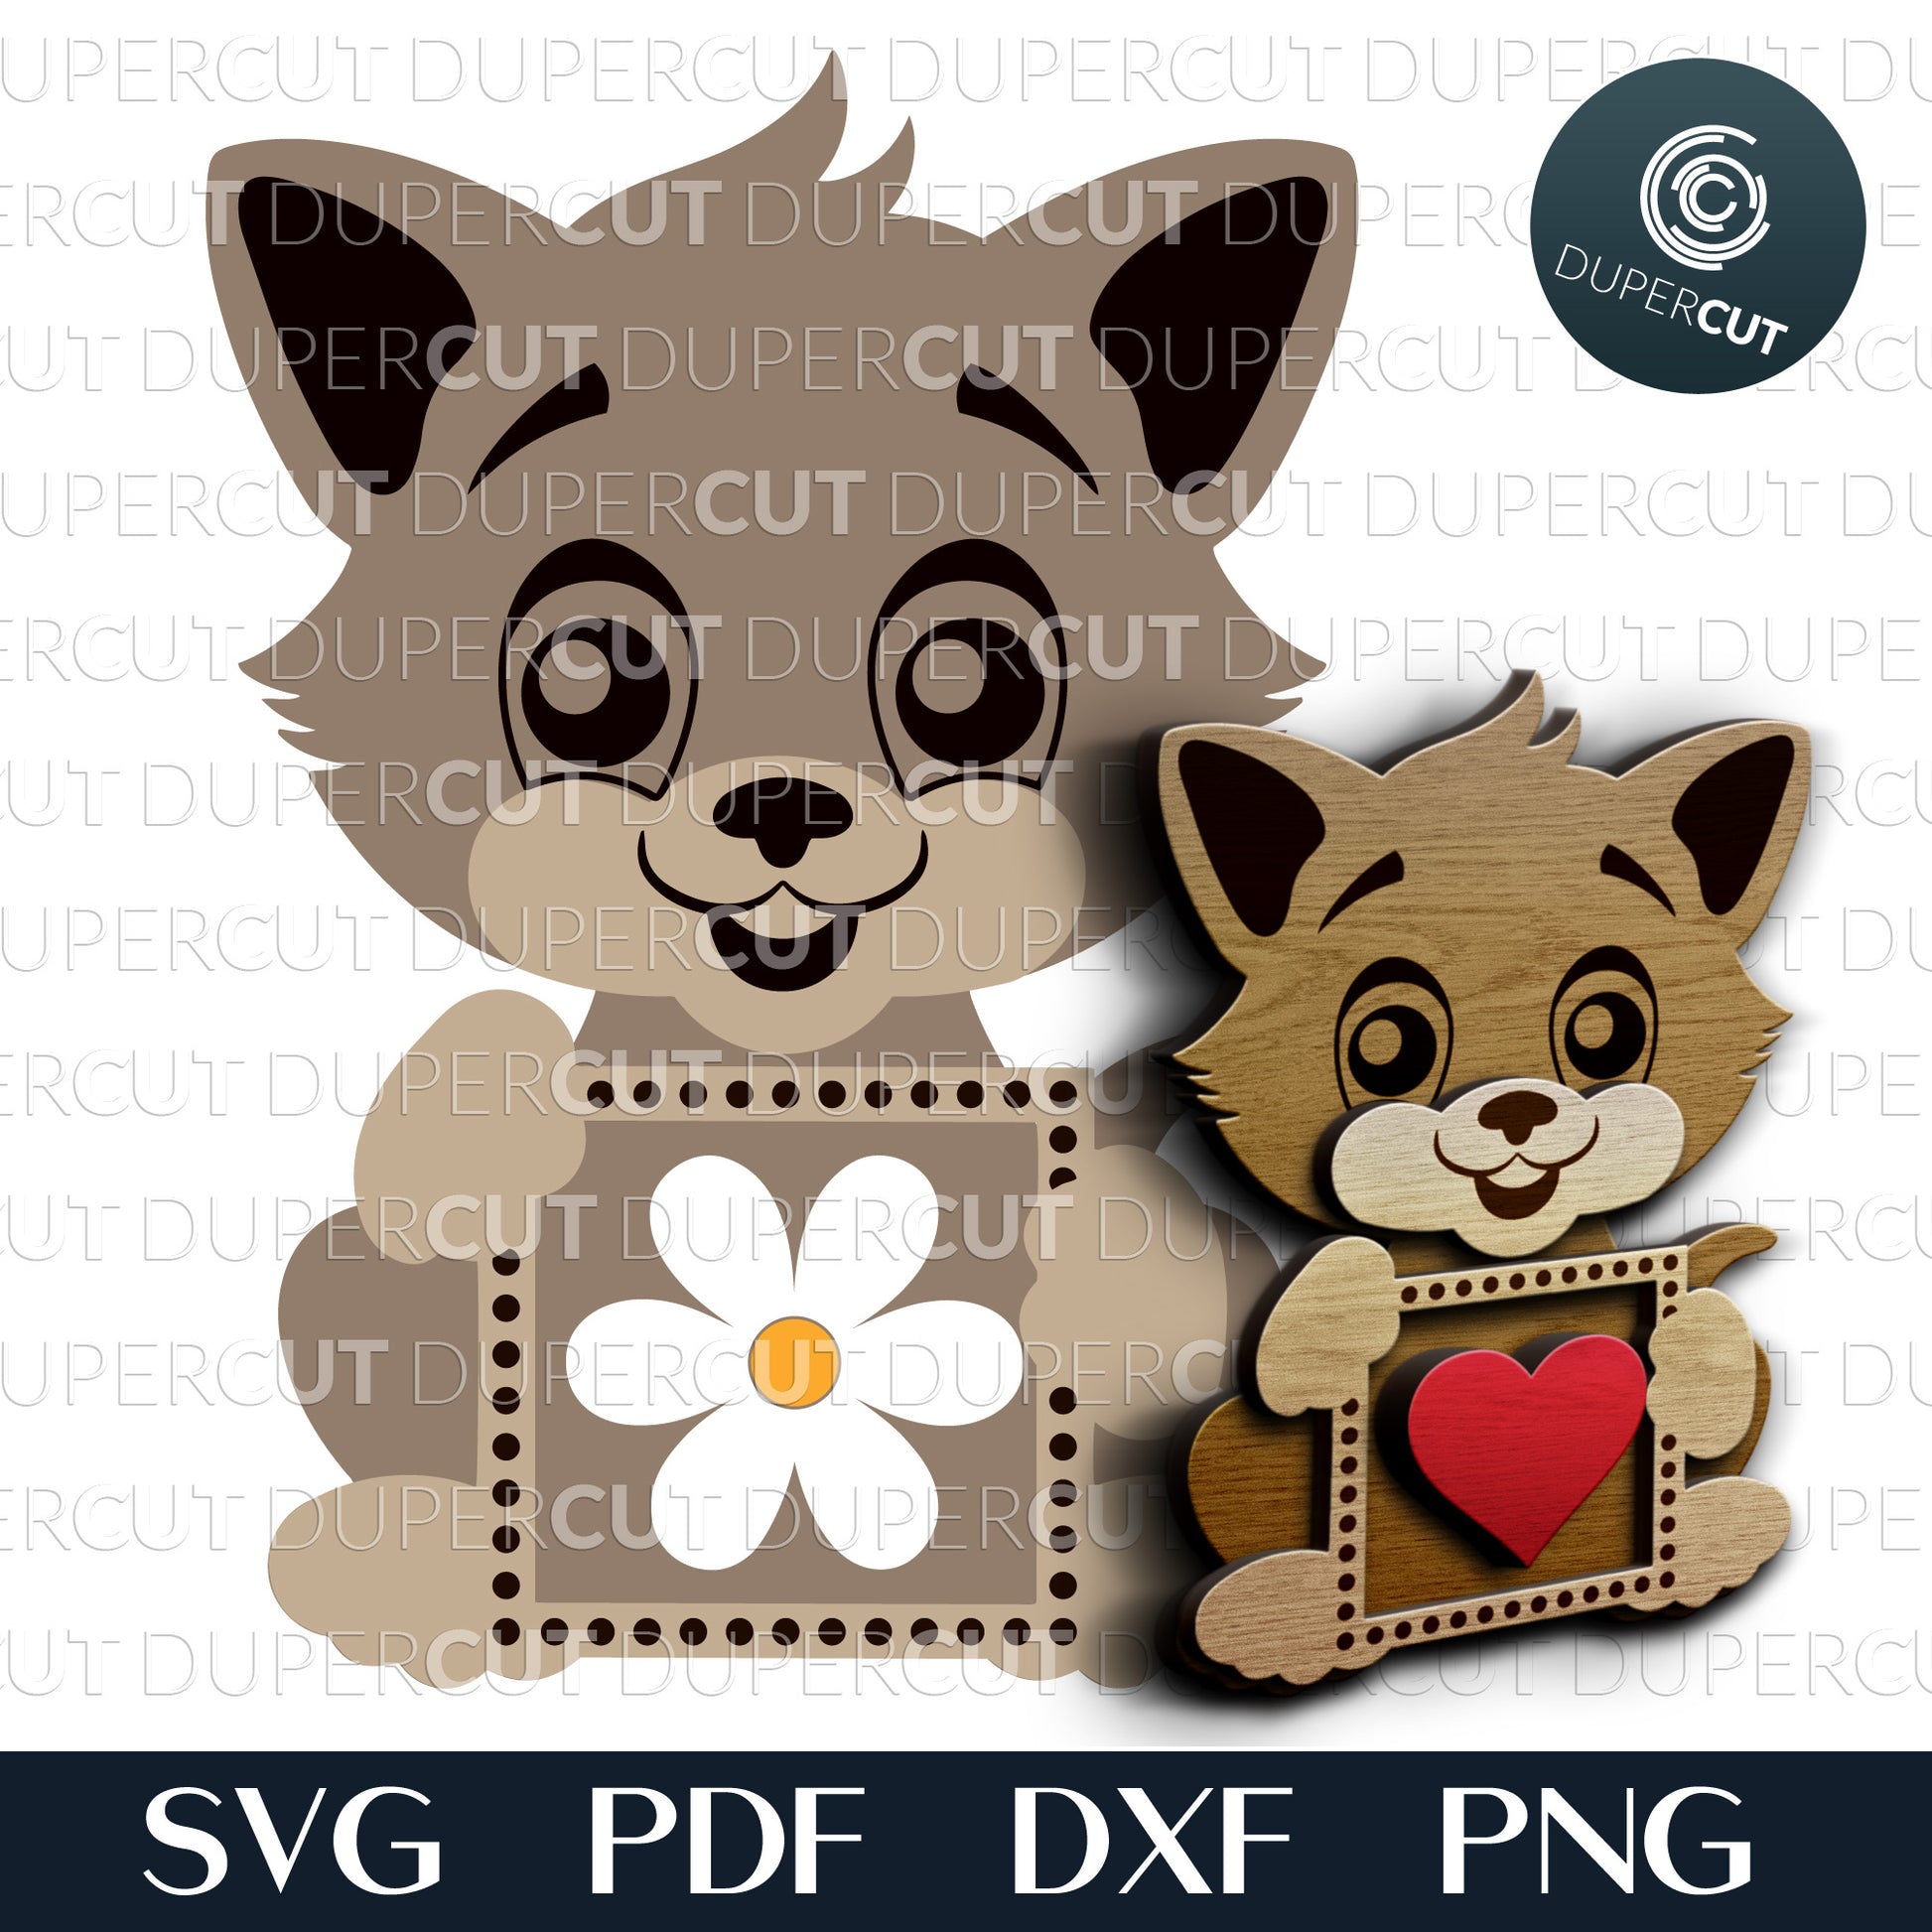 Kitten - Layered files with Interchangeable pieces - SVG PDF vector template for Glowforge, Cricut, Silhouette Cameo, CNC plasma machines 